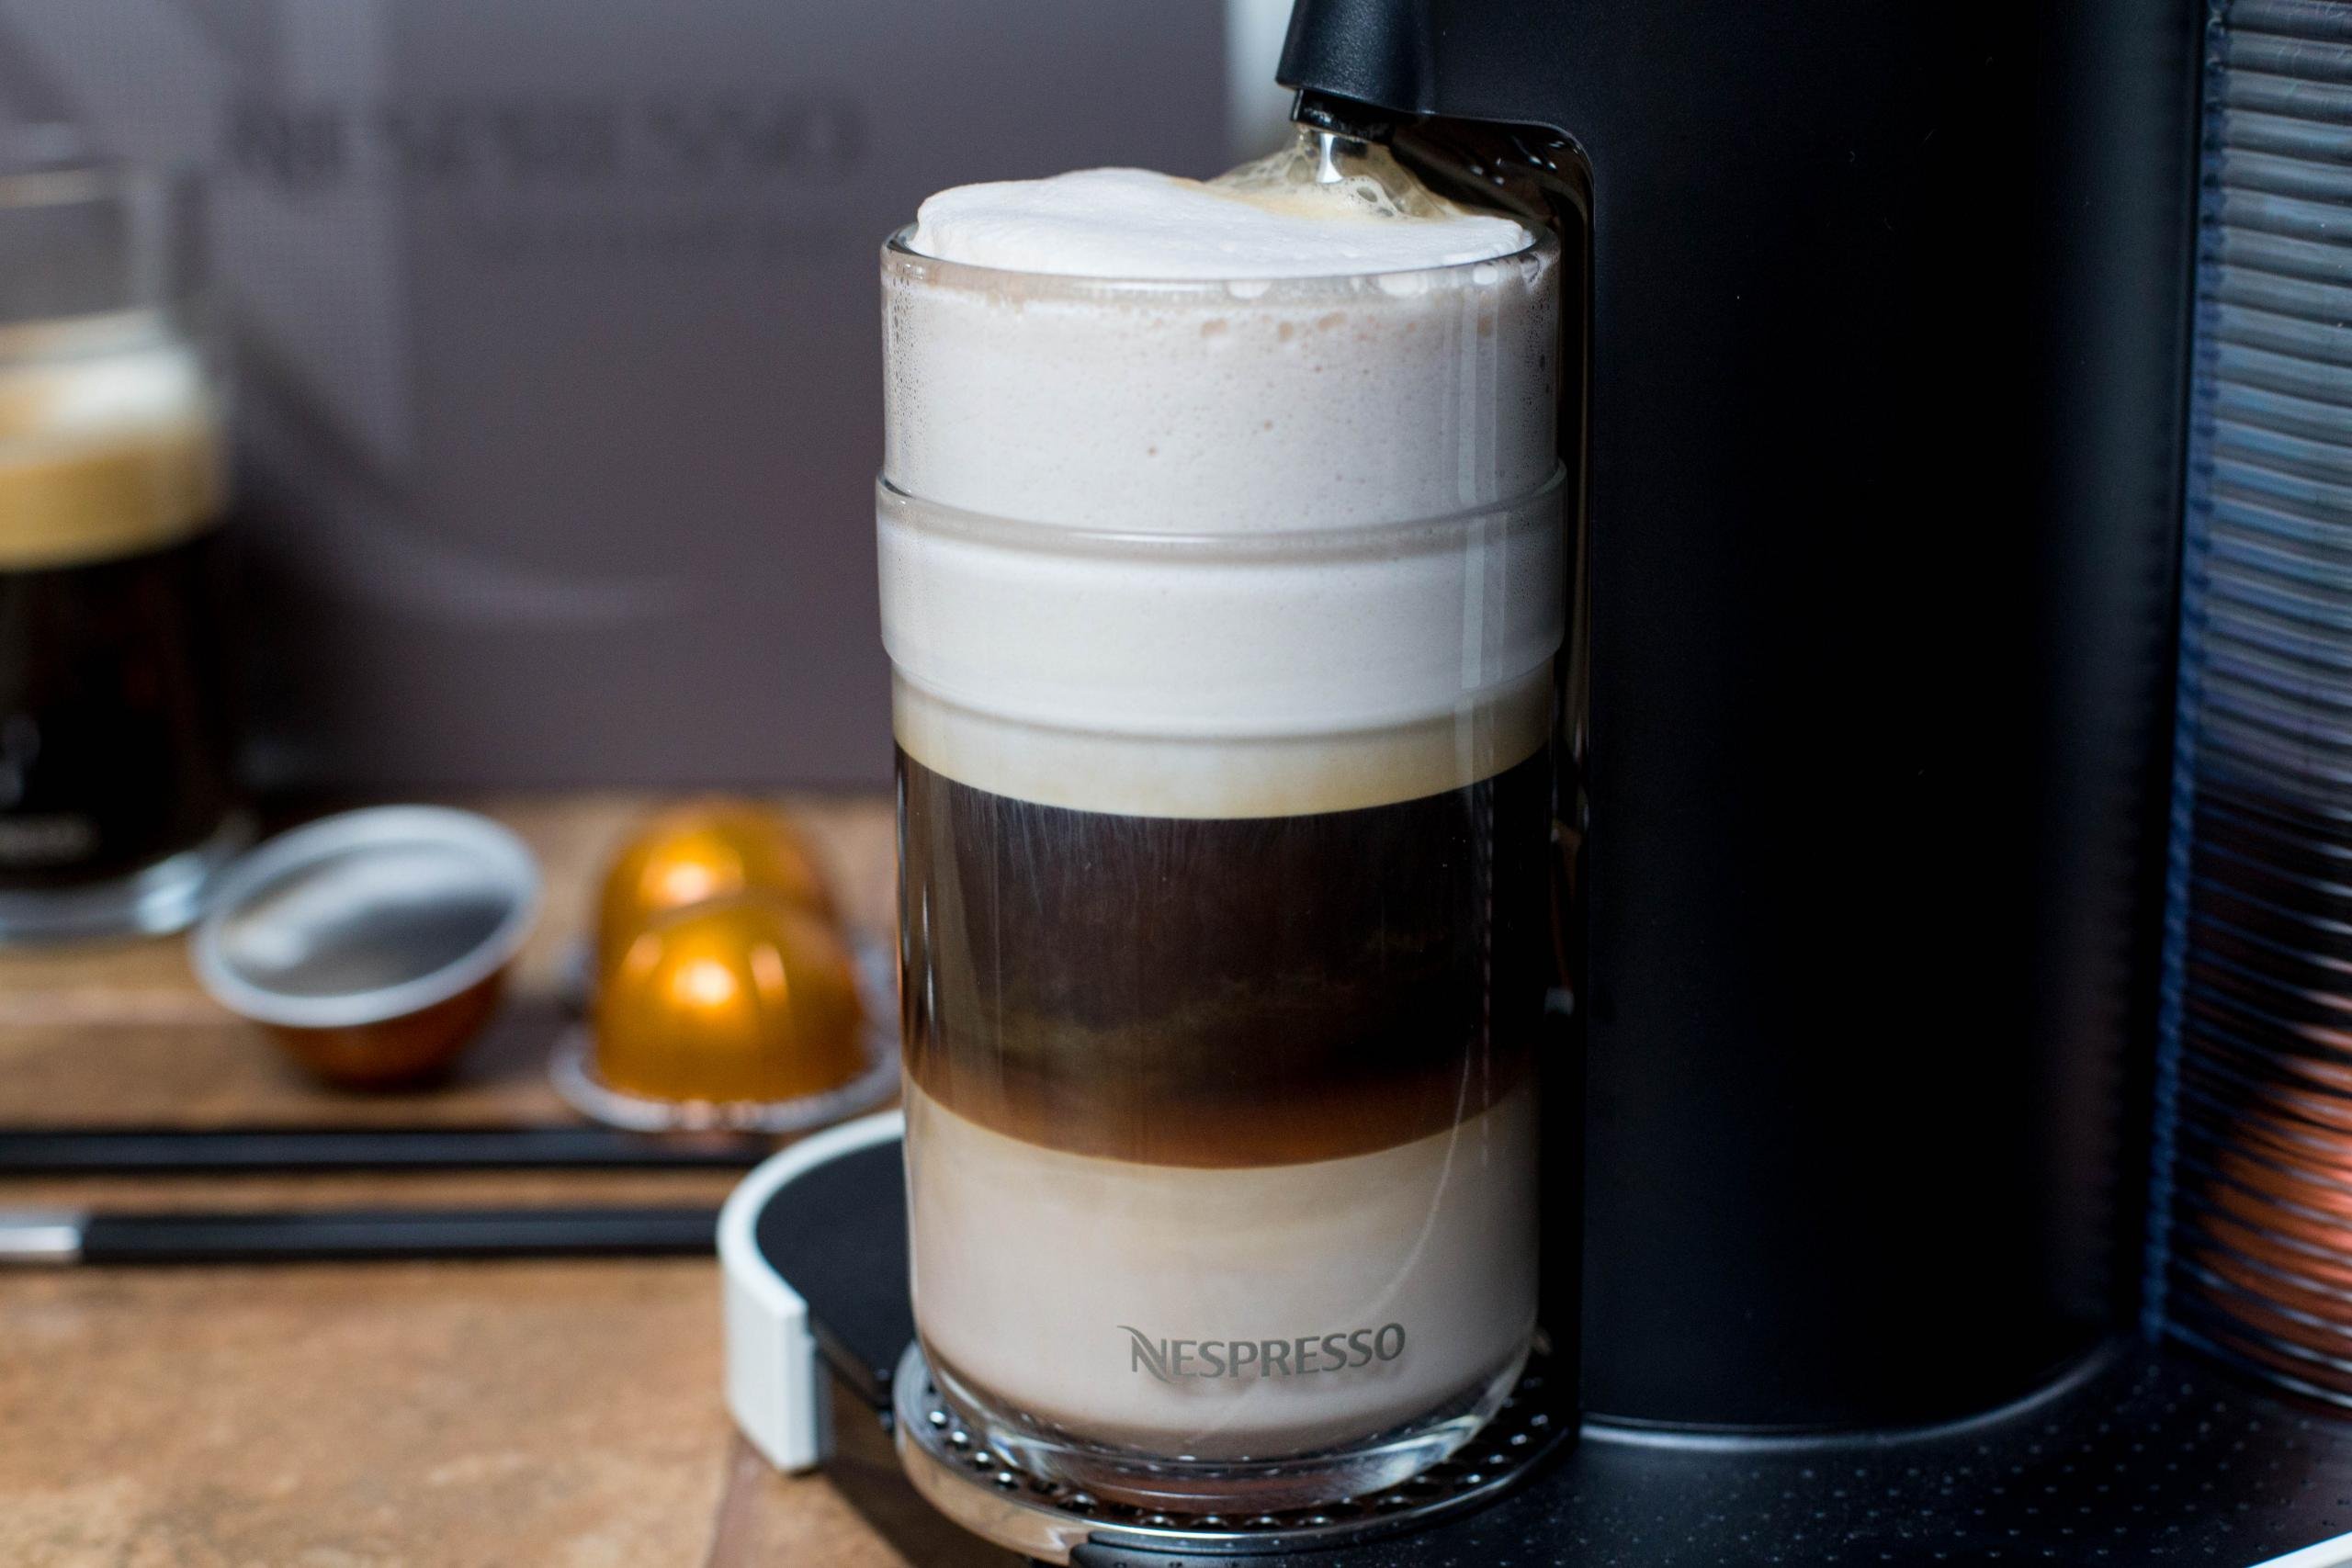 Nespresso Cappuccino Recipe: An Easy Step-By-Step Guide